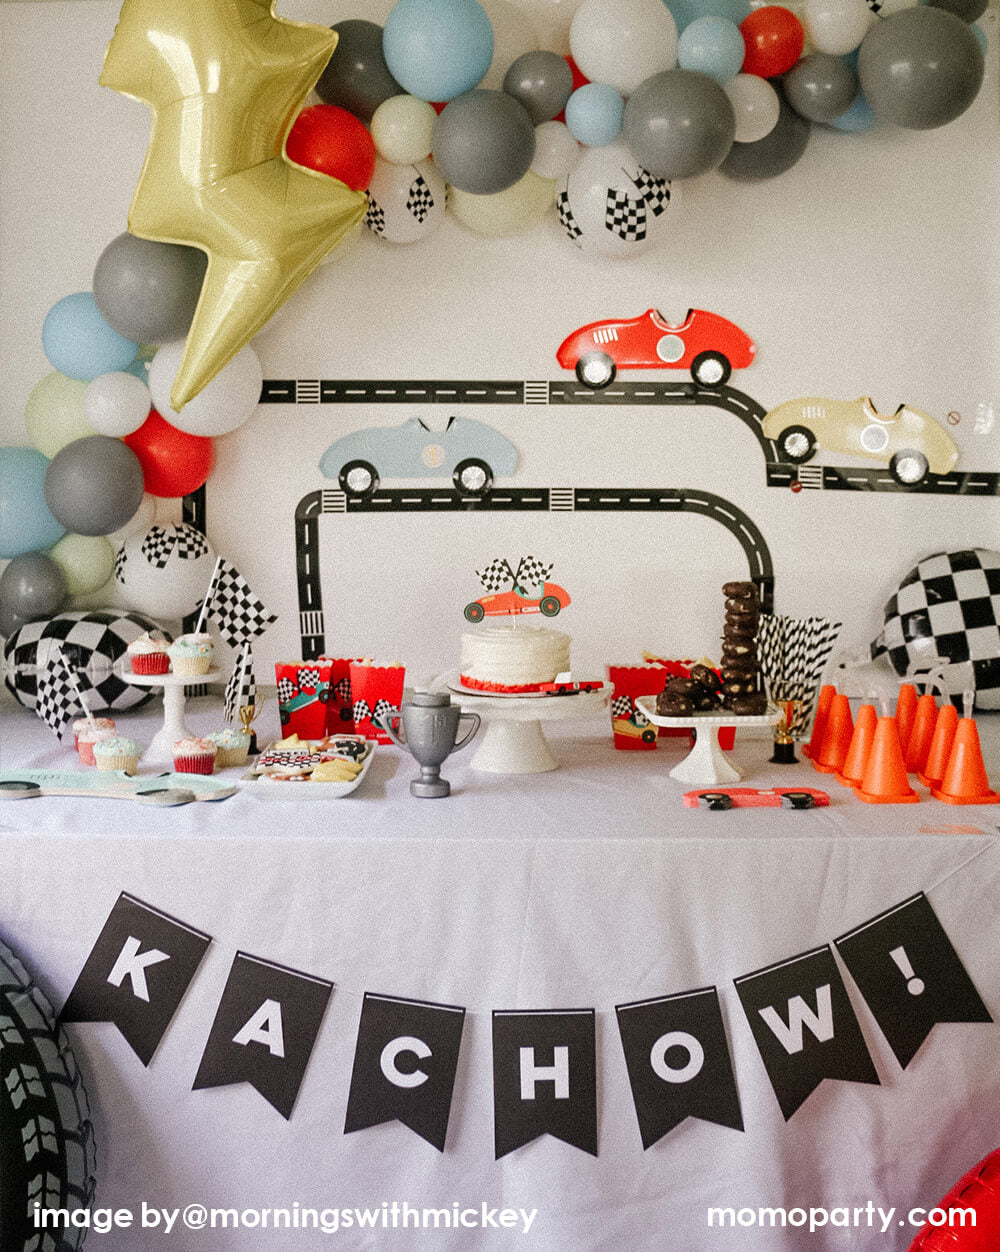 Modern disney race car party, decorated with Road Tape on the wall with Meri Meri Race Car Die-cut Paper Plates, modern pastel themed balloon cloud mix with flag latex balloon and lighting bolt foil balloon, race car topper on a buttercream cake, trophy sipper, mini donuts as tire on a cake stand, red popcorn cups with race car stickers next to the main cake. A modern Car themed Birthday Party at home by Mornings-with-Mickey